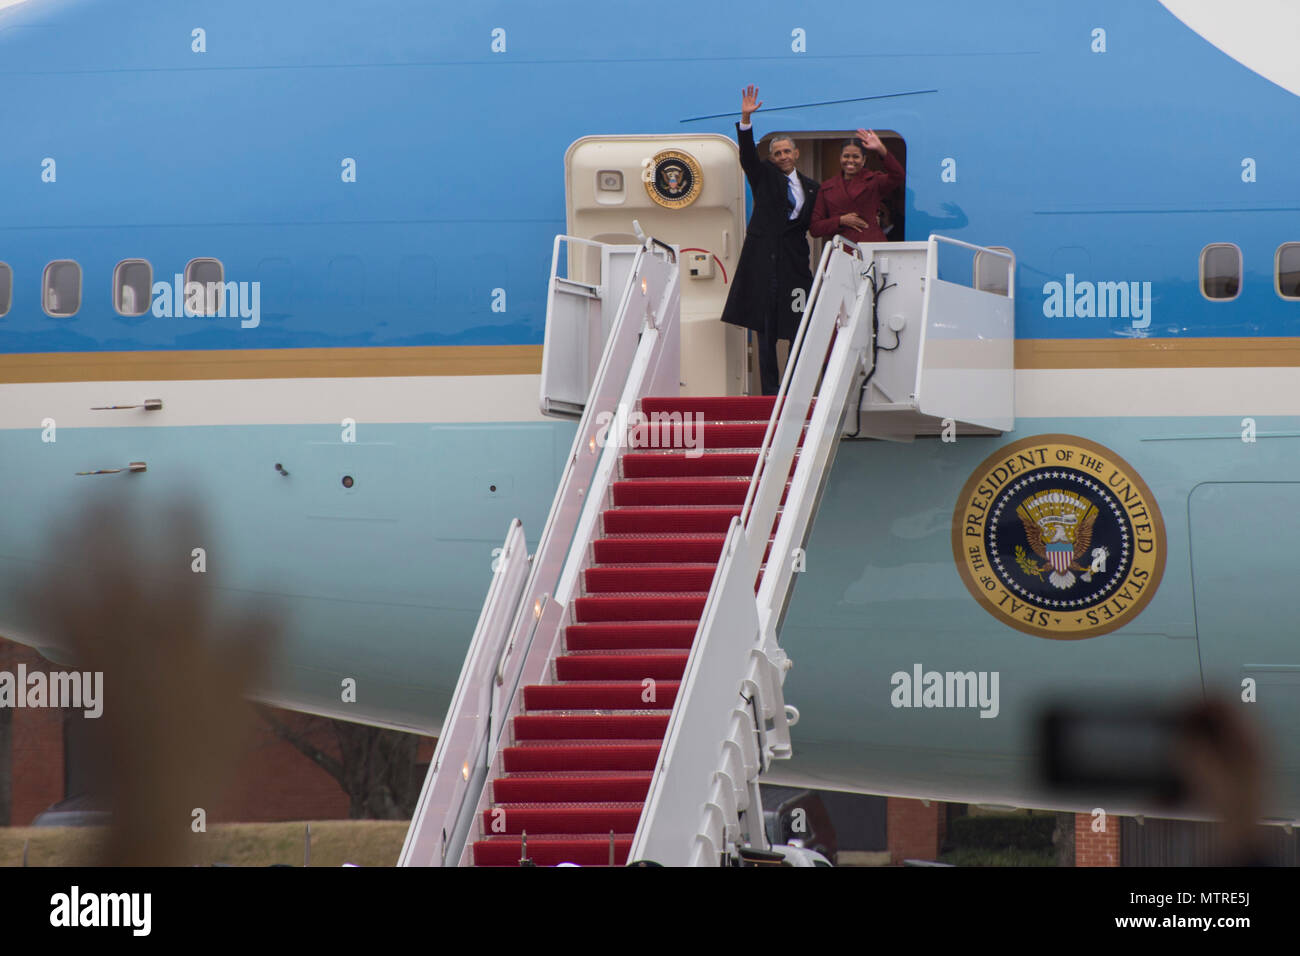 Former President Barack Obama and his wife Michelle wave goodbye after his farewell speech on Joint Base Andrews, Md., Jan. 20, 2017. Throughout his eight-year tenure as president, Obama traveled to and from JBA aboard Air Force One more than 600 times, traveling around the world. (U.S. Air Force photo/Senior Airman Ryan J. Sonnier/Released) Stock Photo